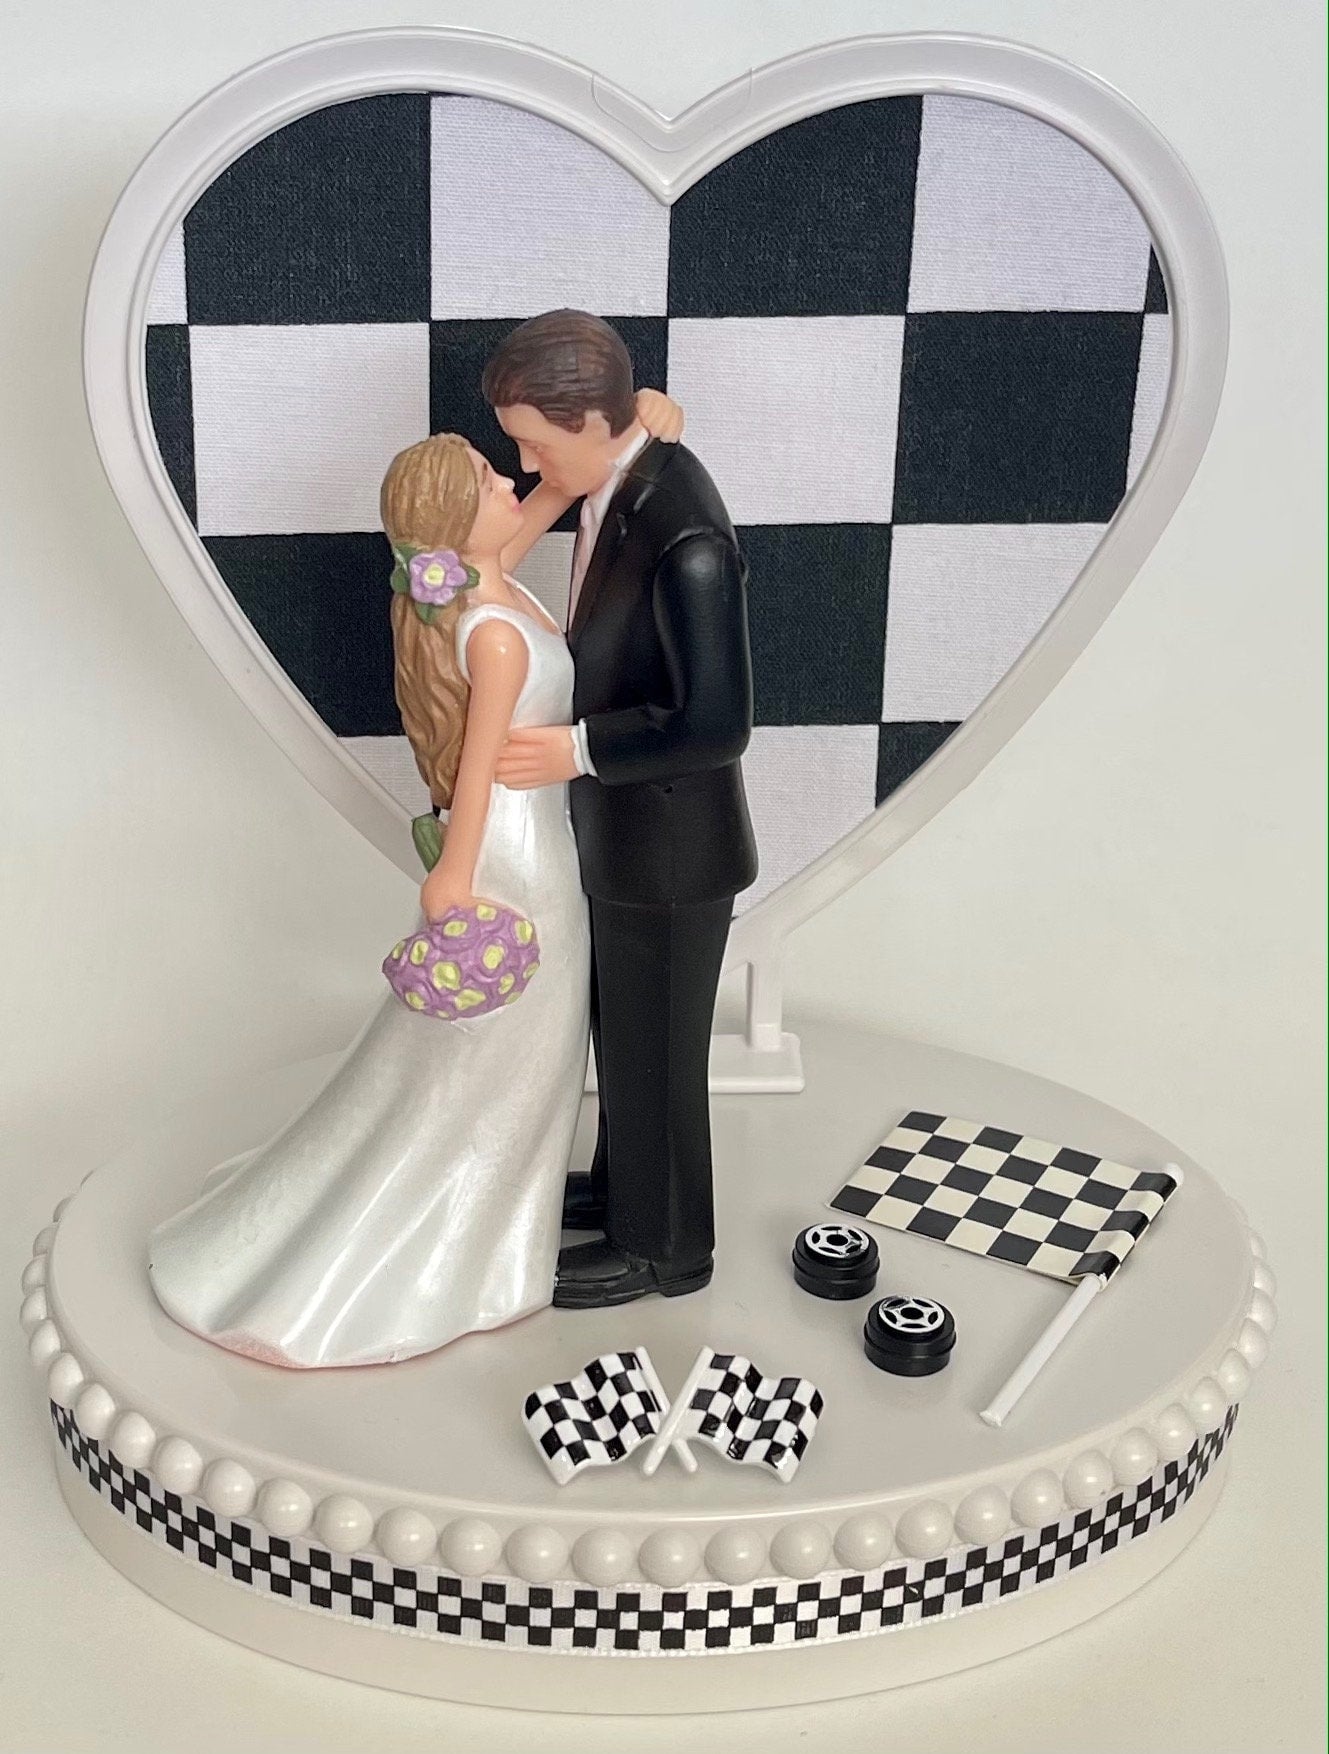 Wedding Cake Topper Checkered Flag Racing Themed Beautiful Long-Haired Bride Groom Fun Bridal Shower Reception Gift Unique Groom's Cake Top